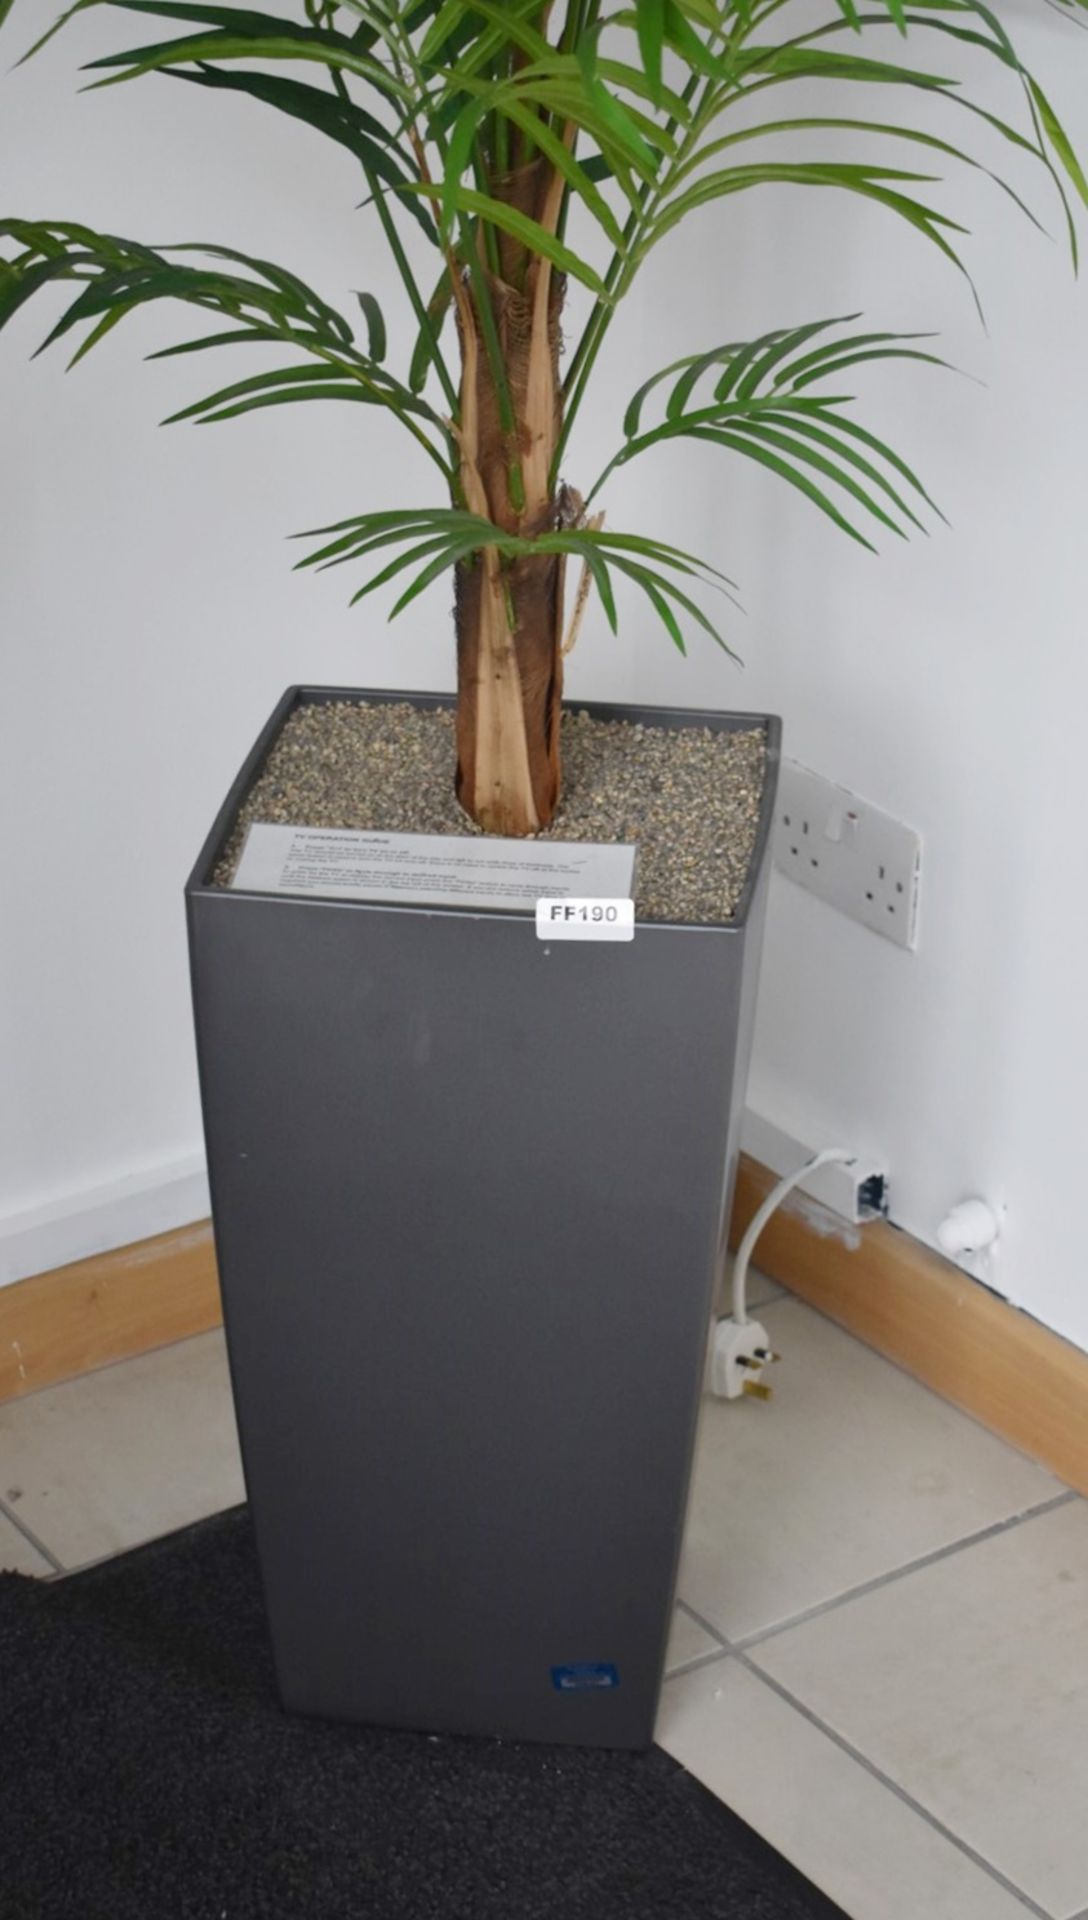 1 x Artificial Plants With Planter - Overall Height 200cm Approx - Ref: FF000 D - CL544 - - Image 3 of 3